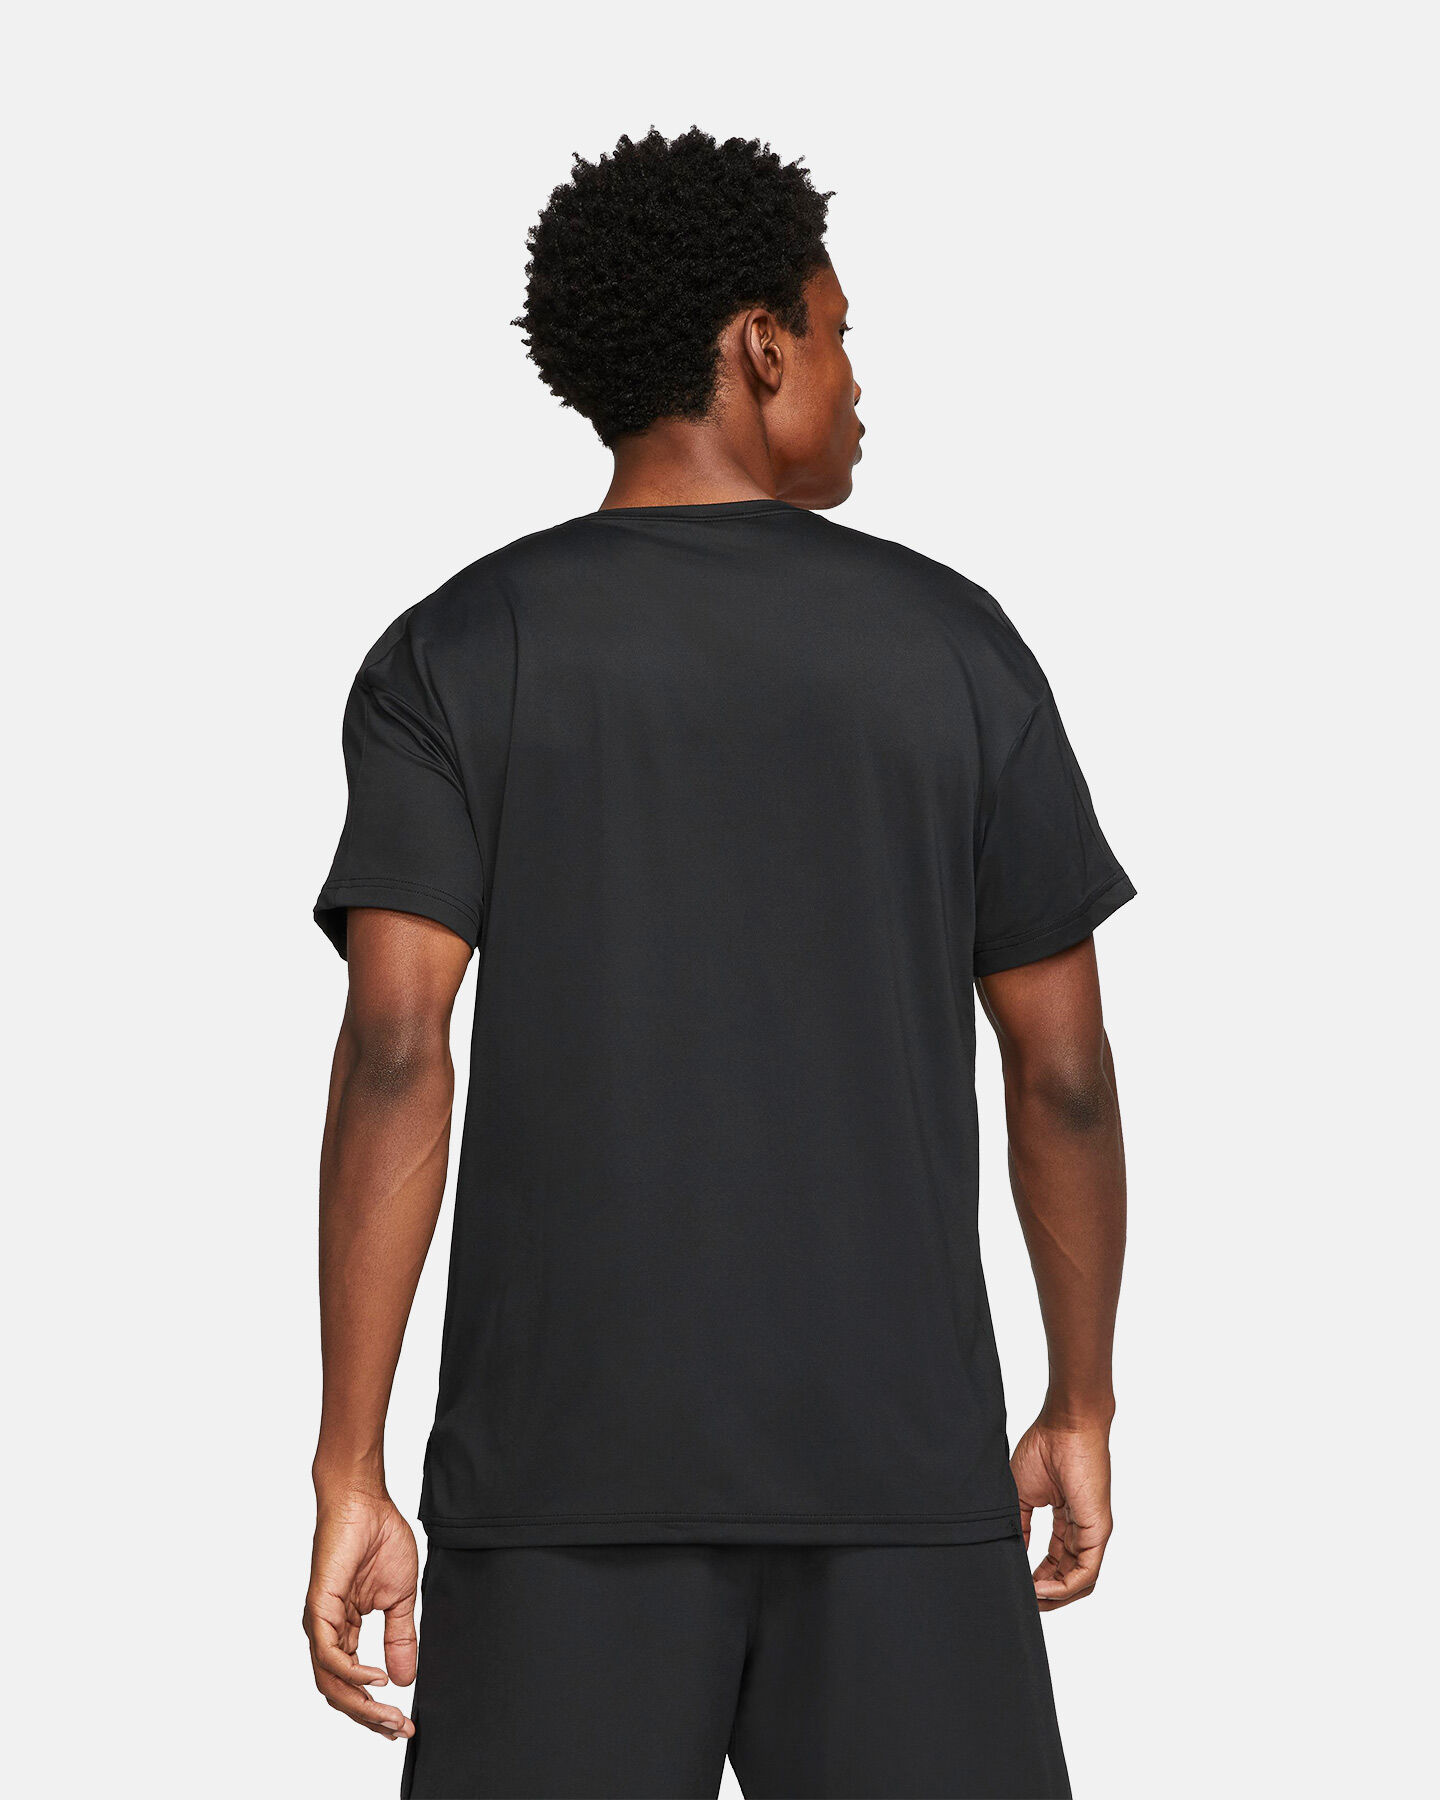  T-Shirt training NIKE SS DRY M S5269645|011|S scatto 1